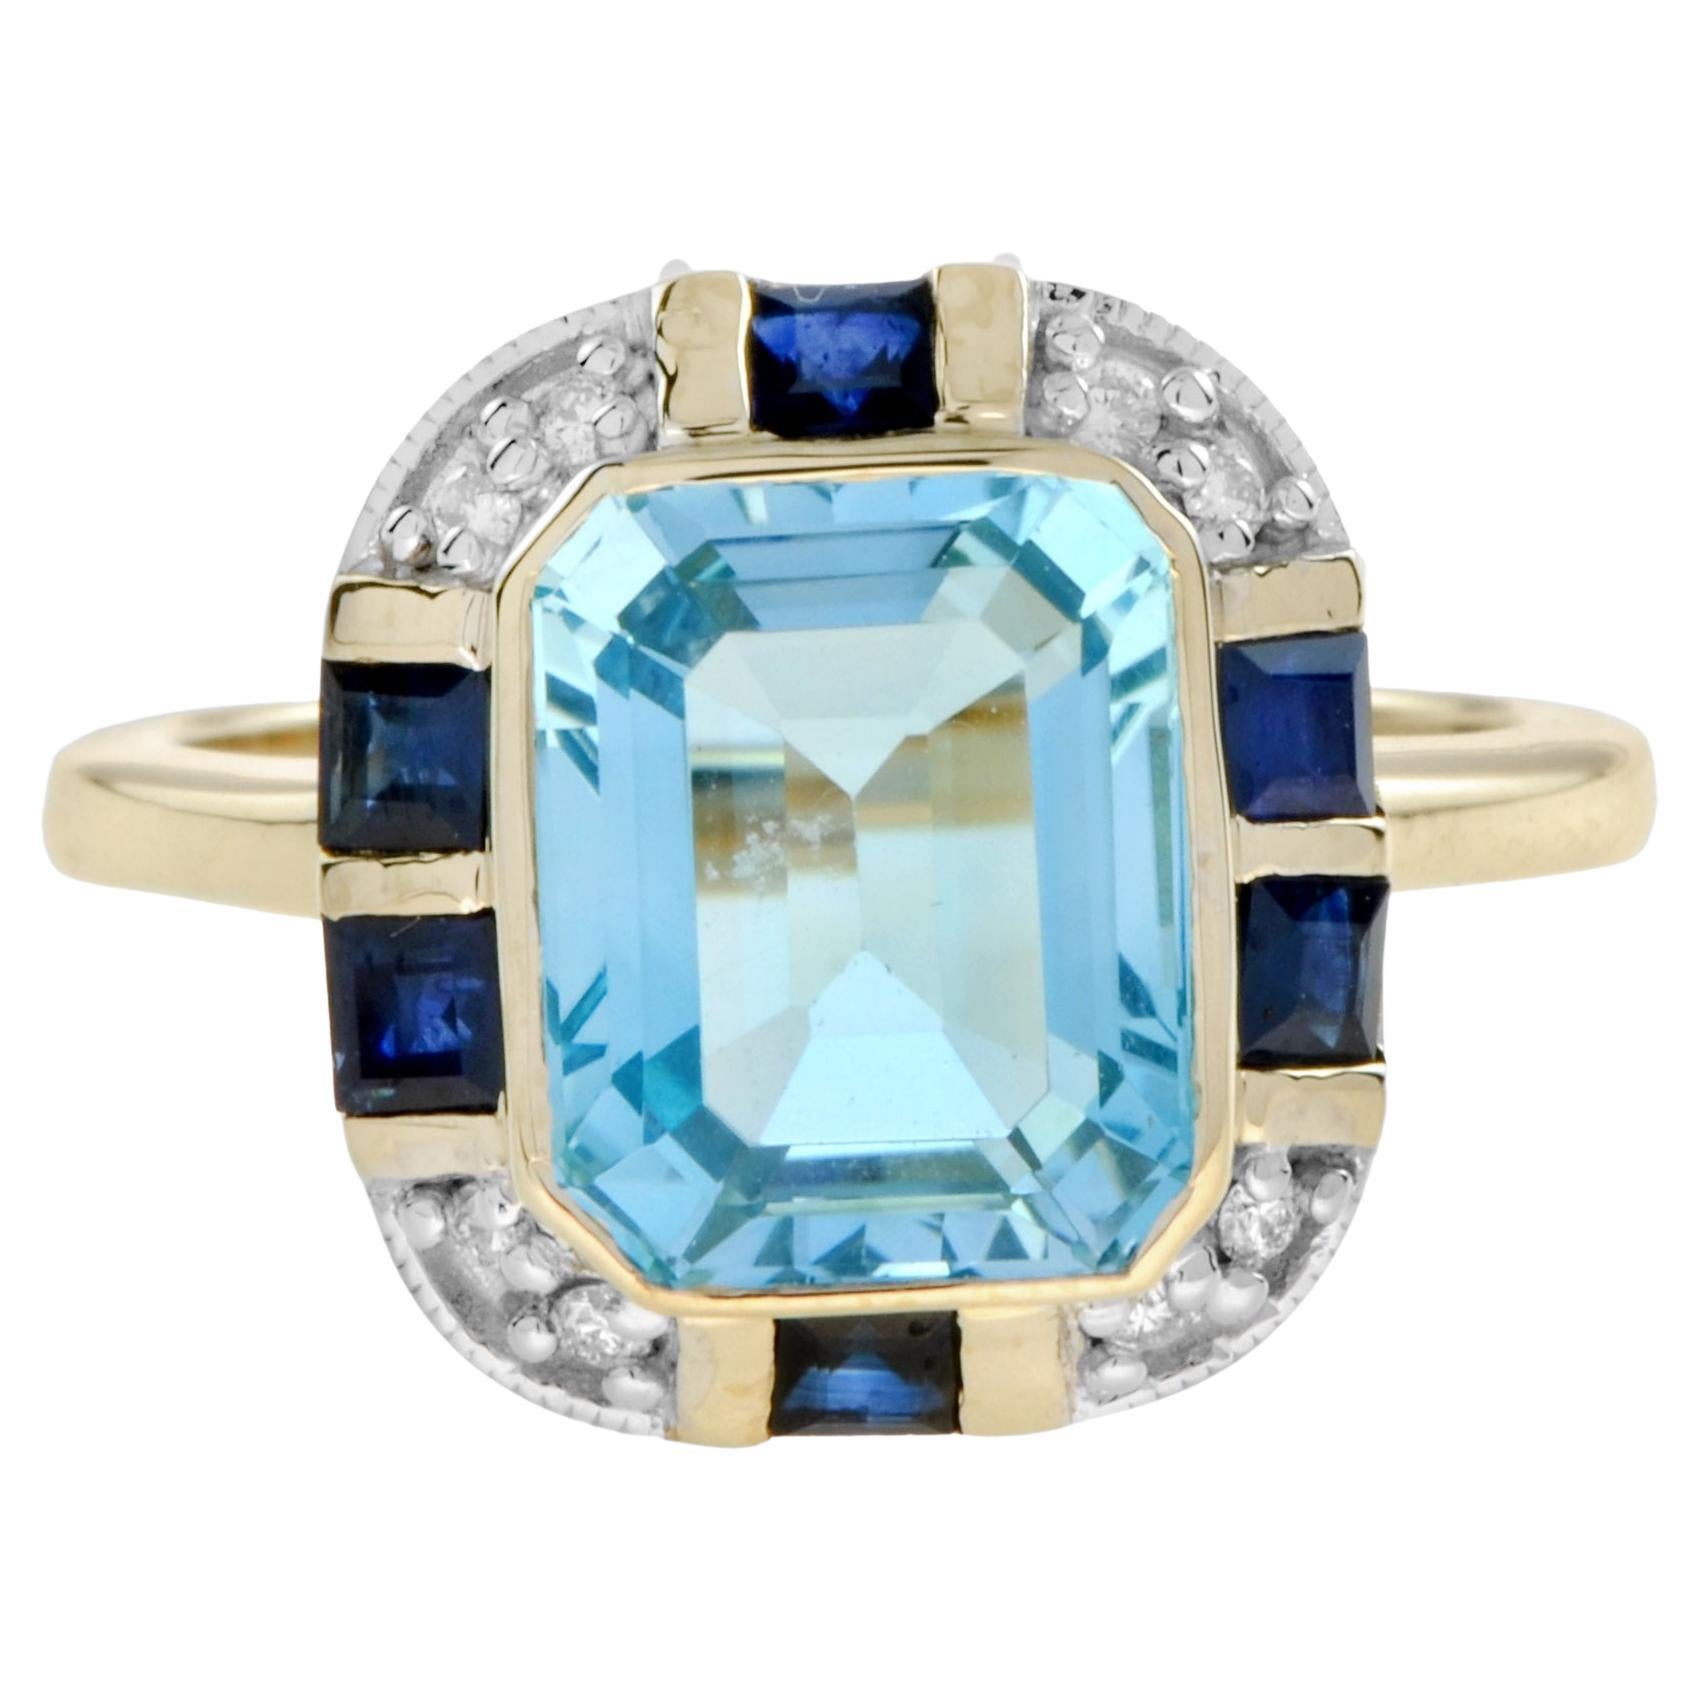 For Sale:  Art Deco Style Blue Topaz Sapphire and Diamond Ring in White Top Yellow Gold